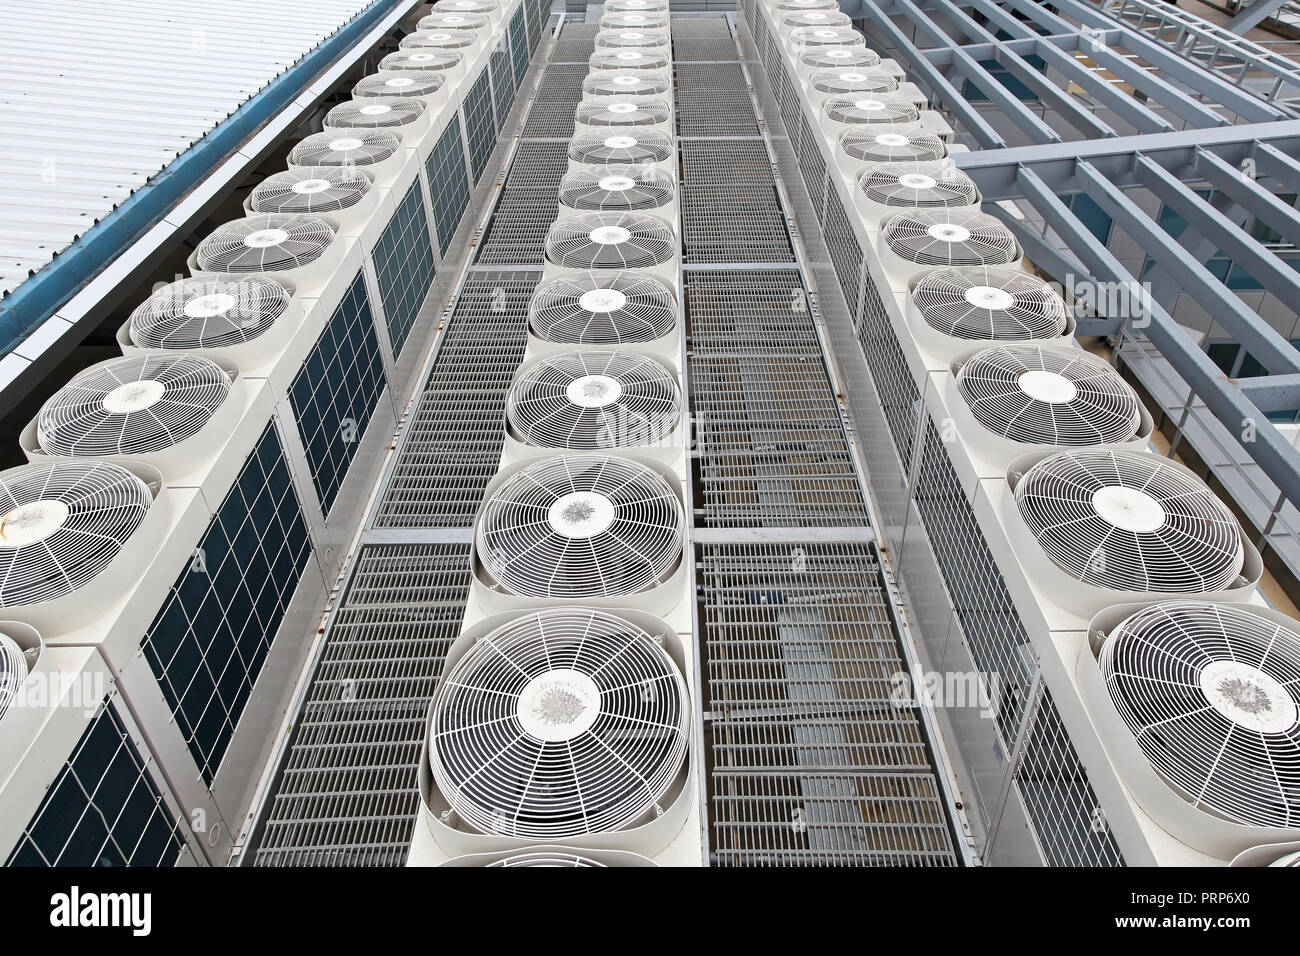 Central air conditioners condenser units at building rooftop Stock Photo -  Alamy